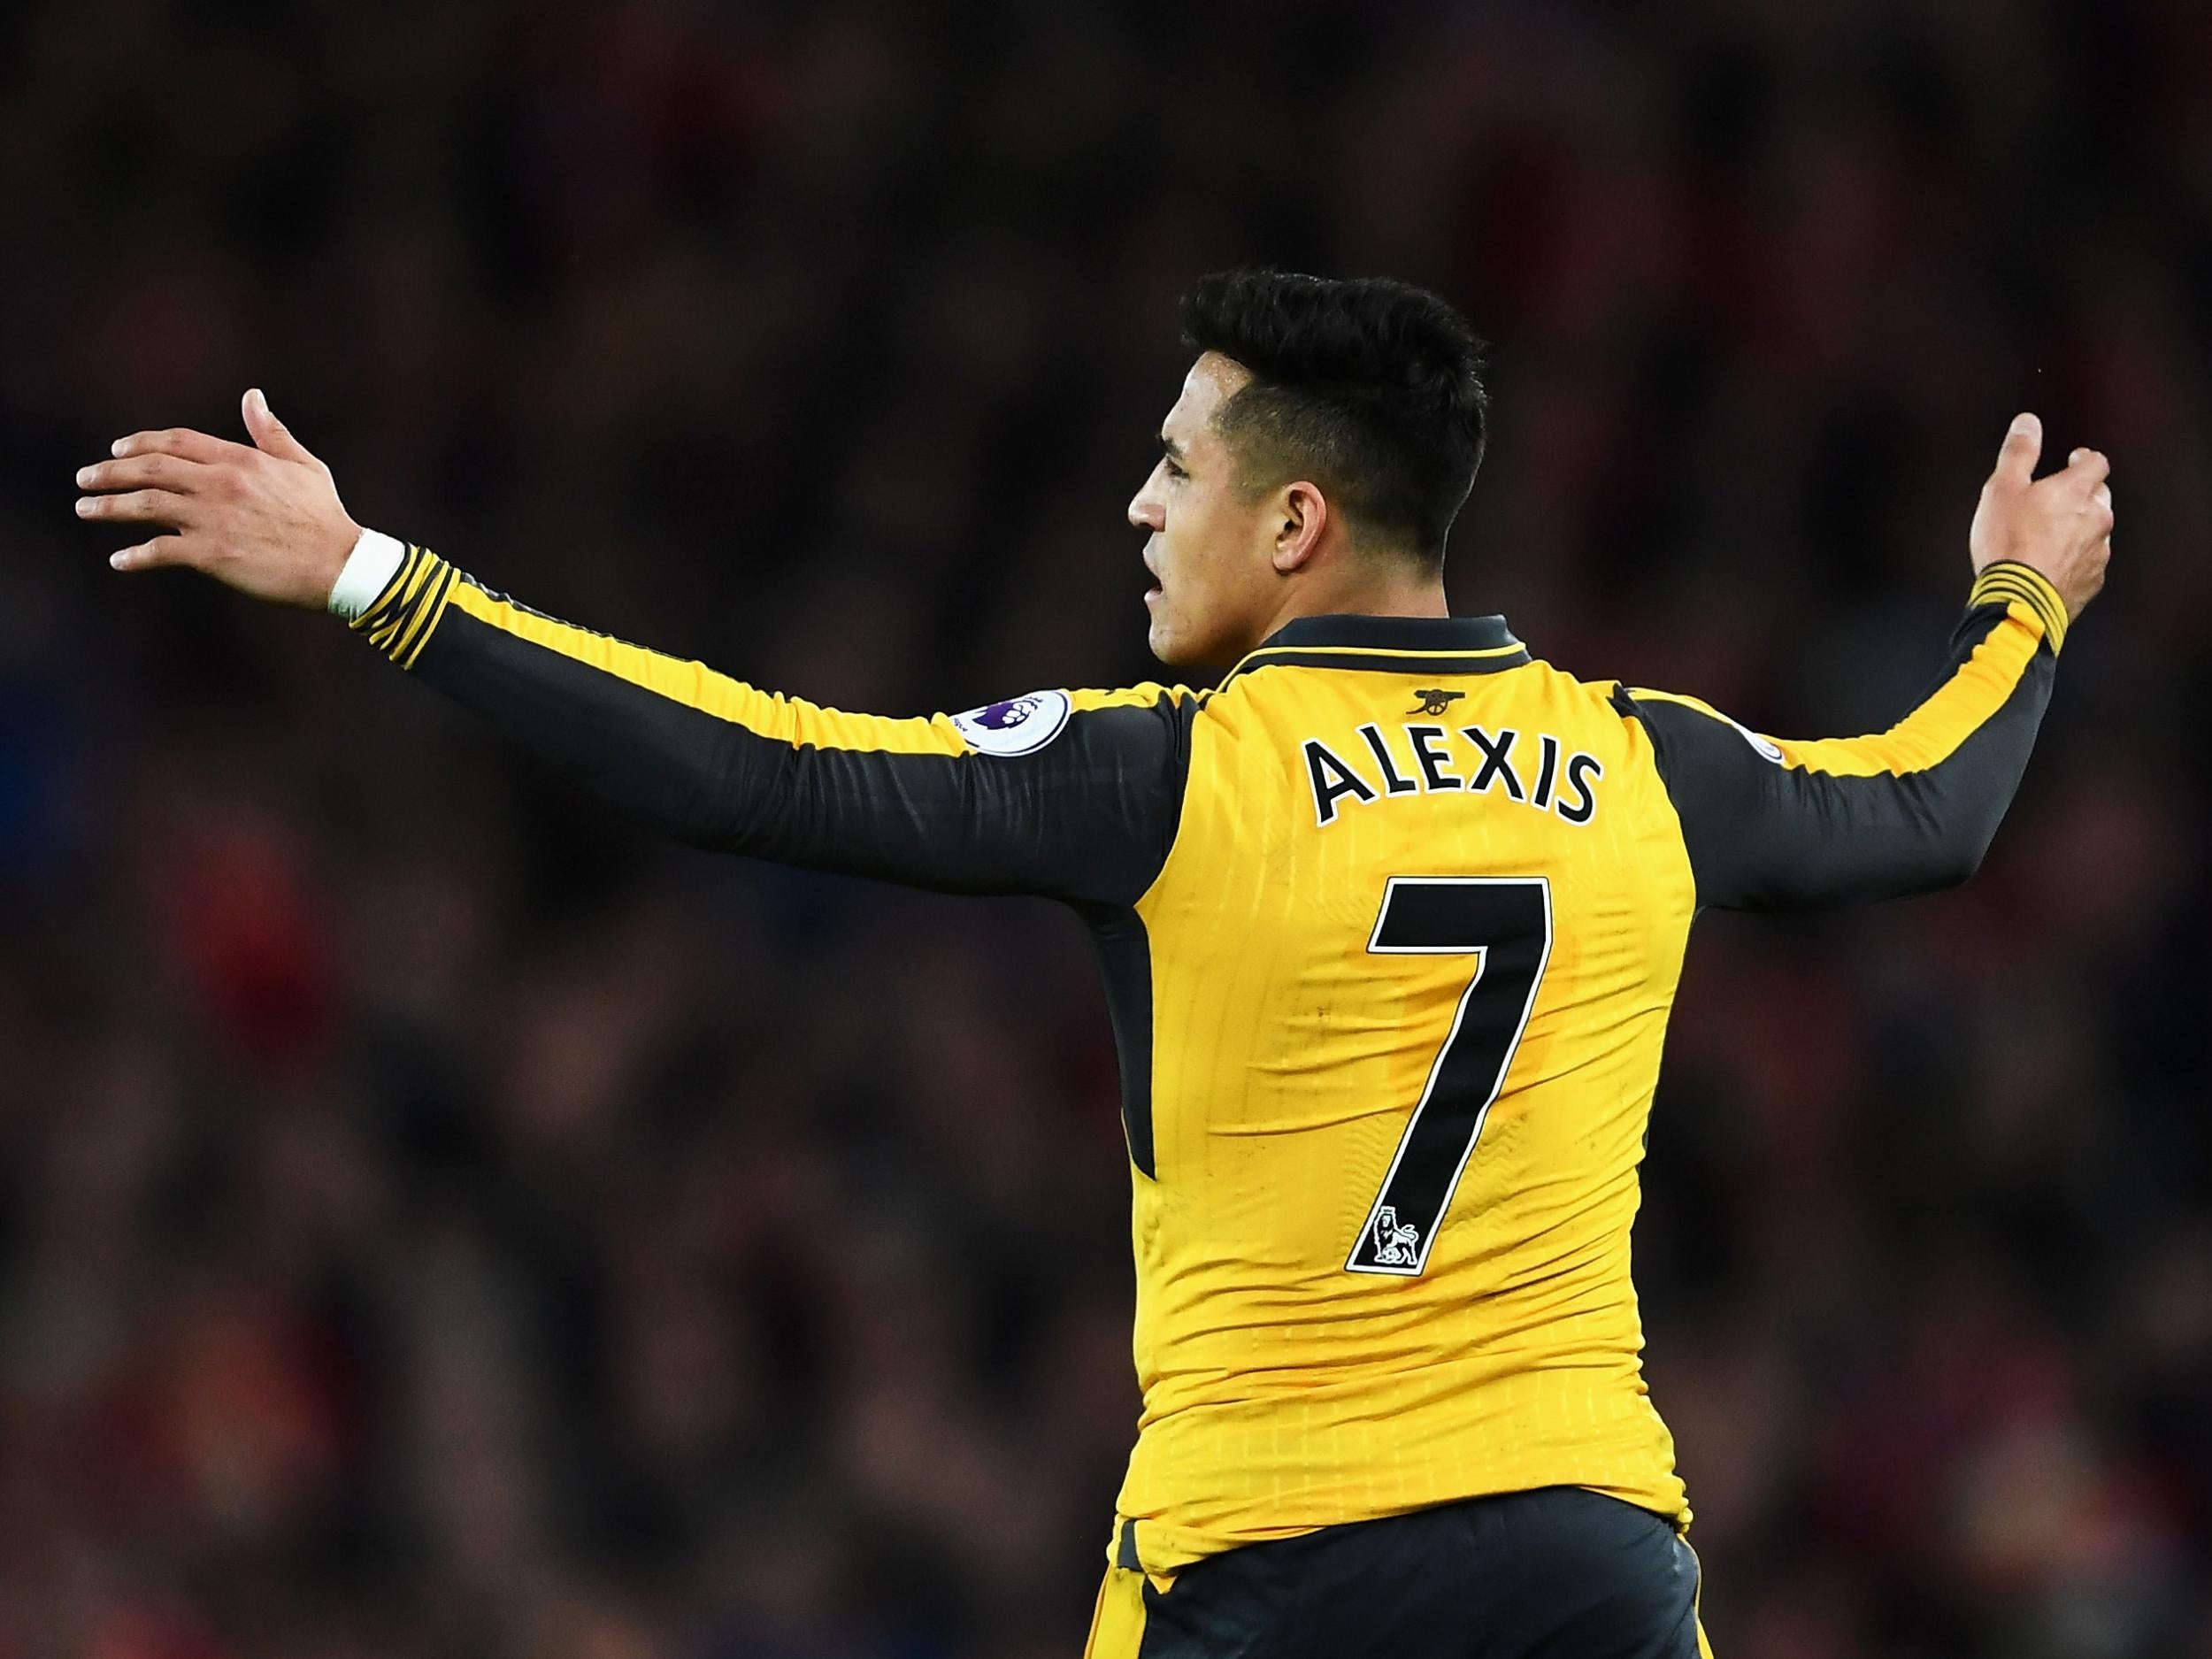 Sanchez will enter the final year of his contract in the summer